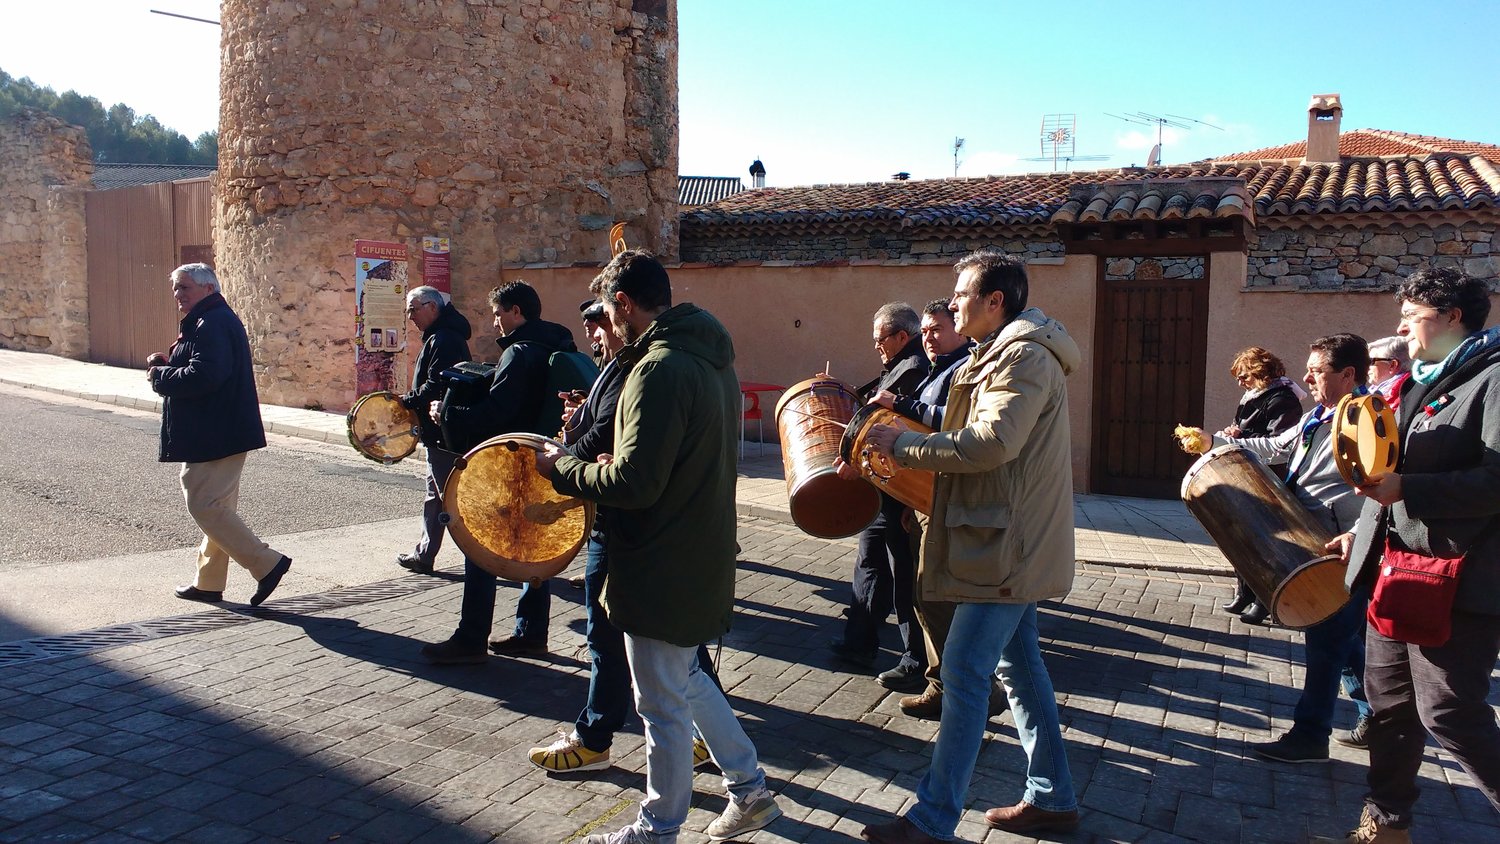 Walking the streets of Spain, providing Christmas cheer, the Ronda Group is now bringing a taste of Castilian music to Tularosa.